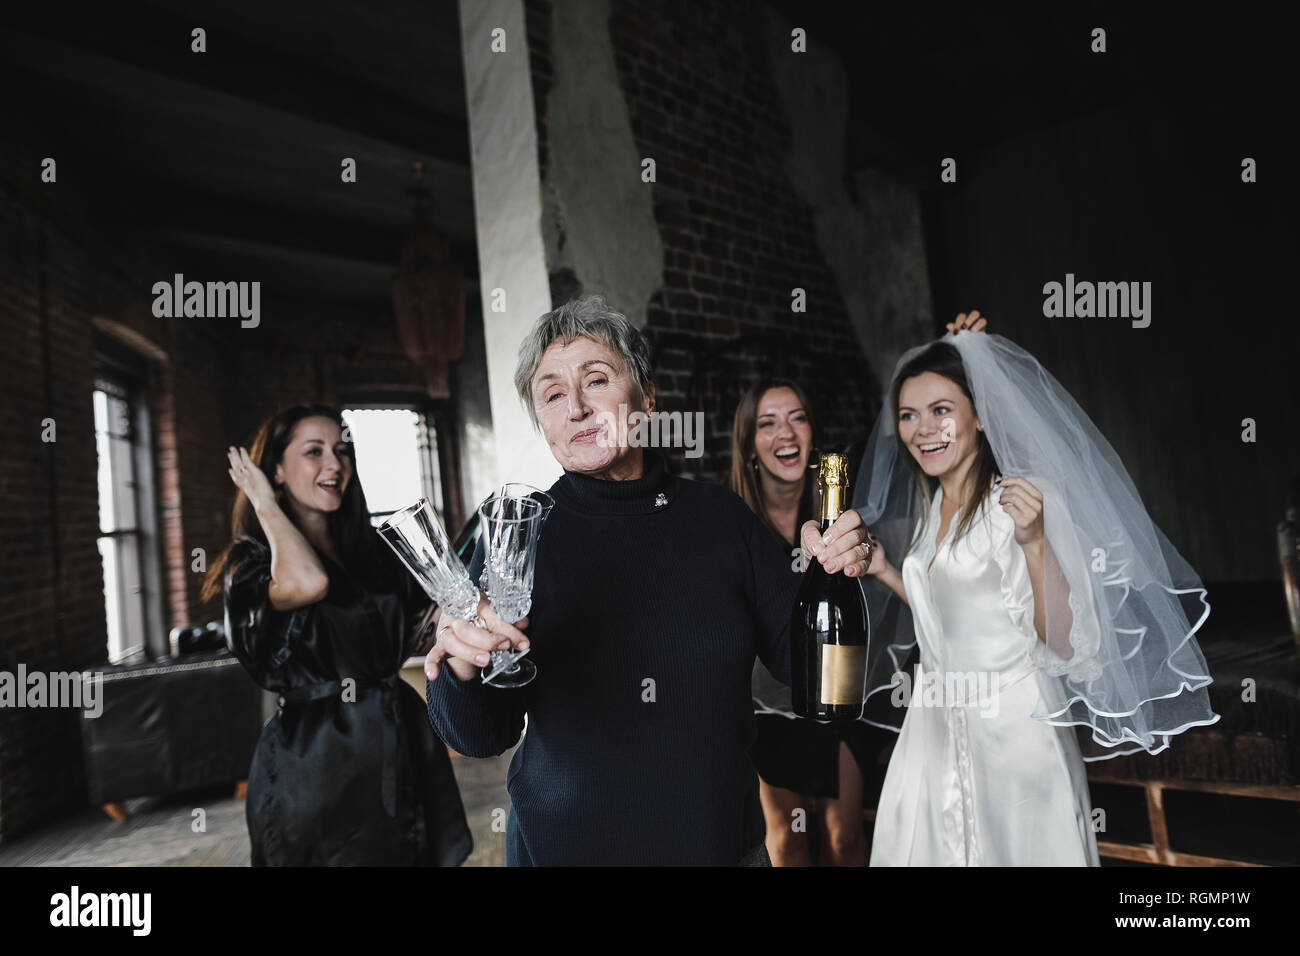 Bride's mother, bridesmaids and bride drinking champagne together Stock Photo